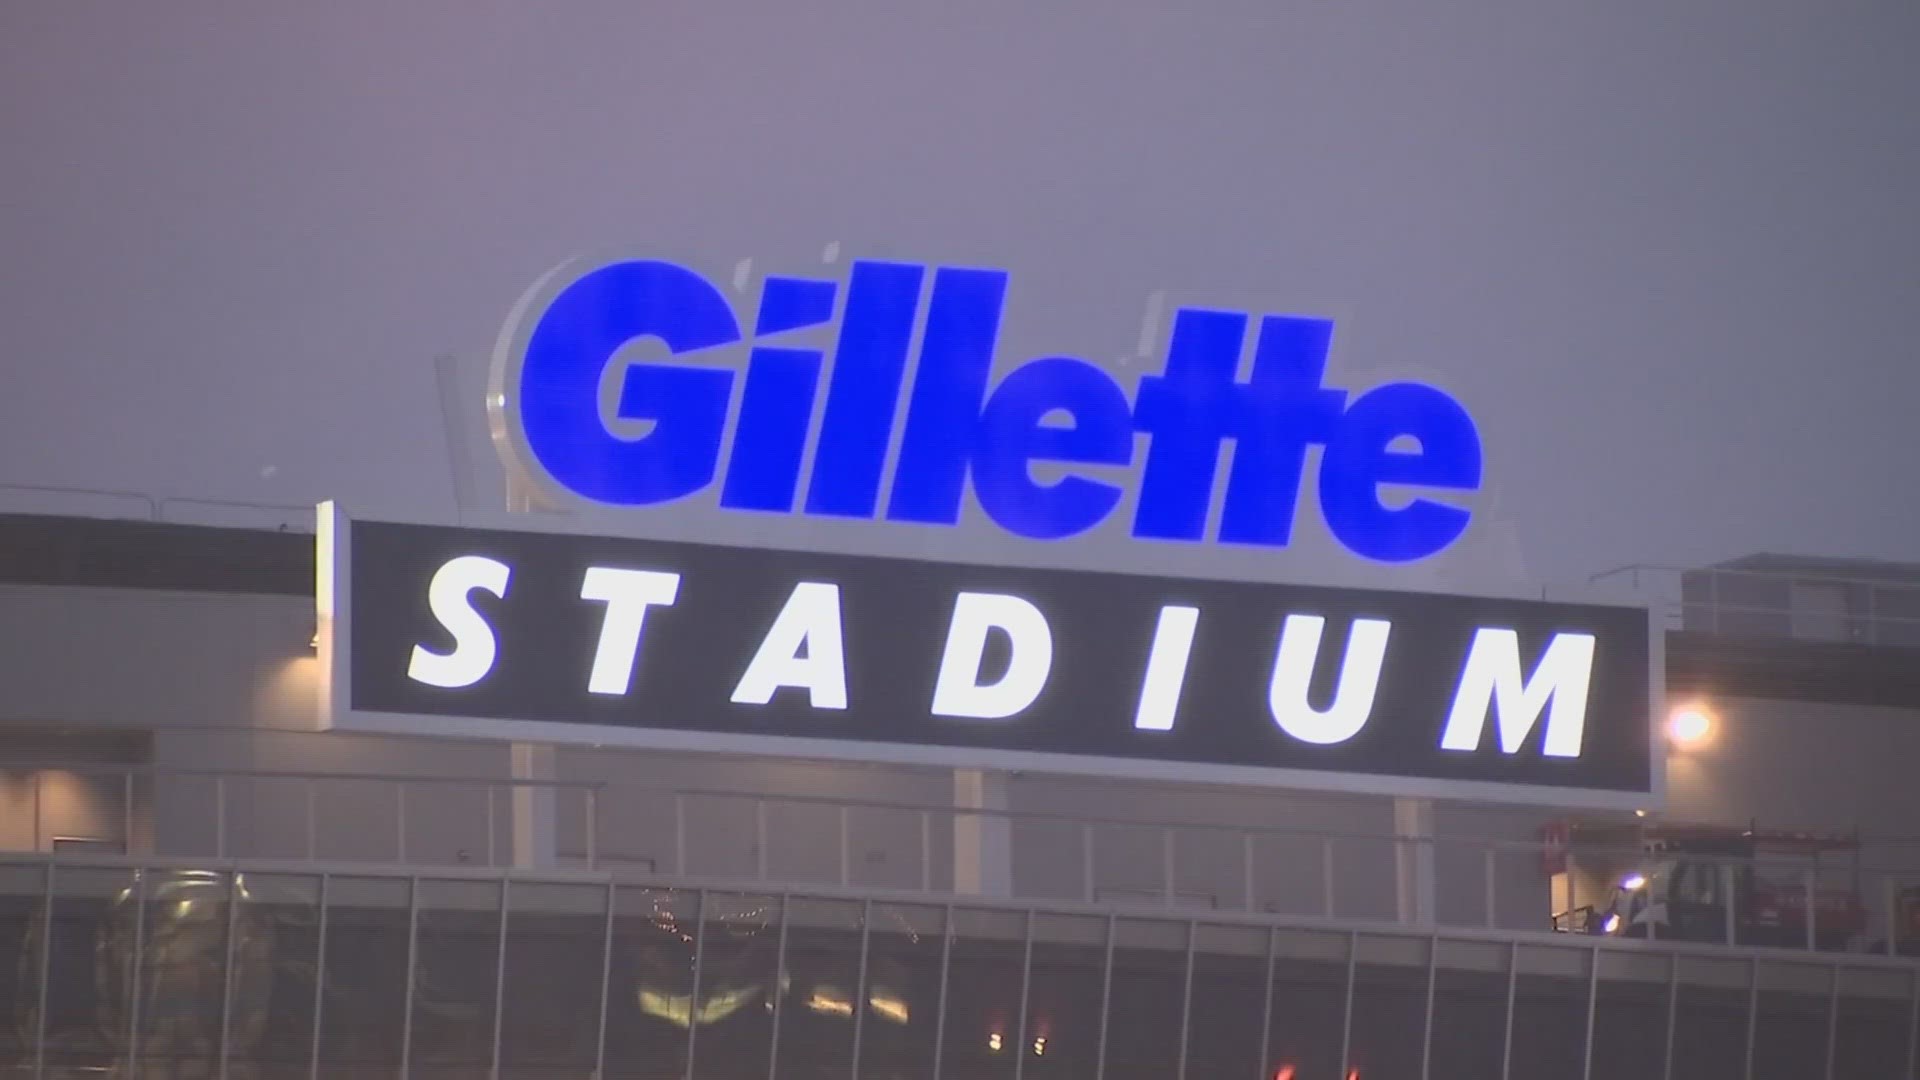 Police and personnel responded to the upper deck at Gillette Stadium shortly before 11 p.m. Sunday.